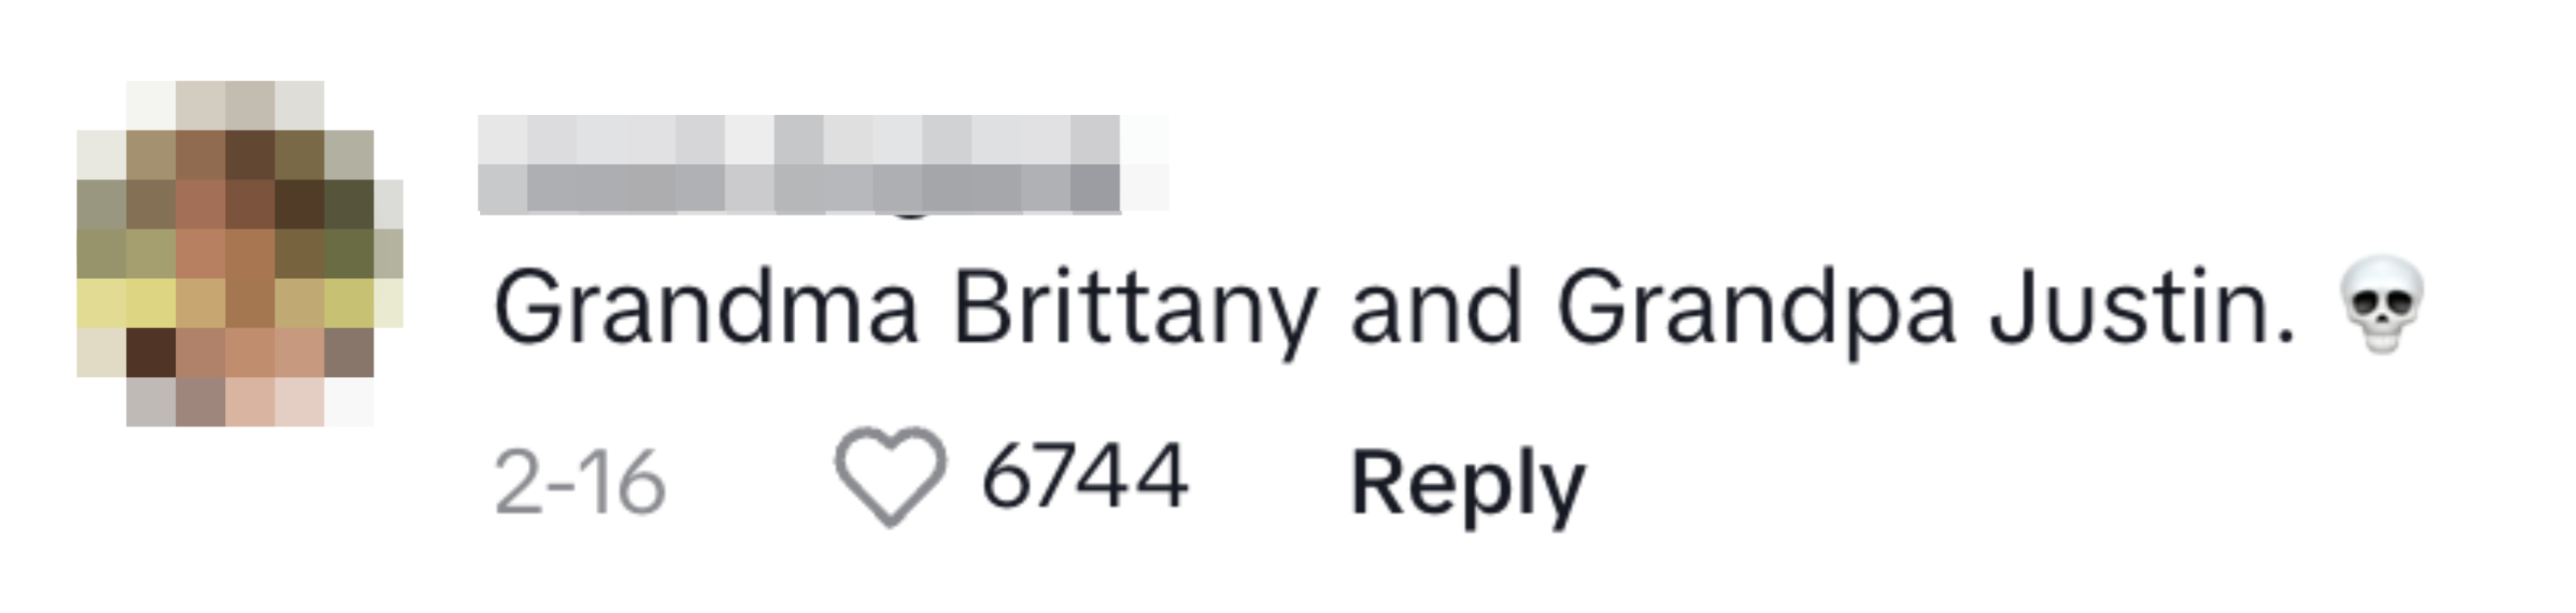 Profile photo of a person next to a comment about &quot;Grandma Brittany and Grandpa Justin&quot; with a skull emoji, likes and reply info visible